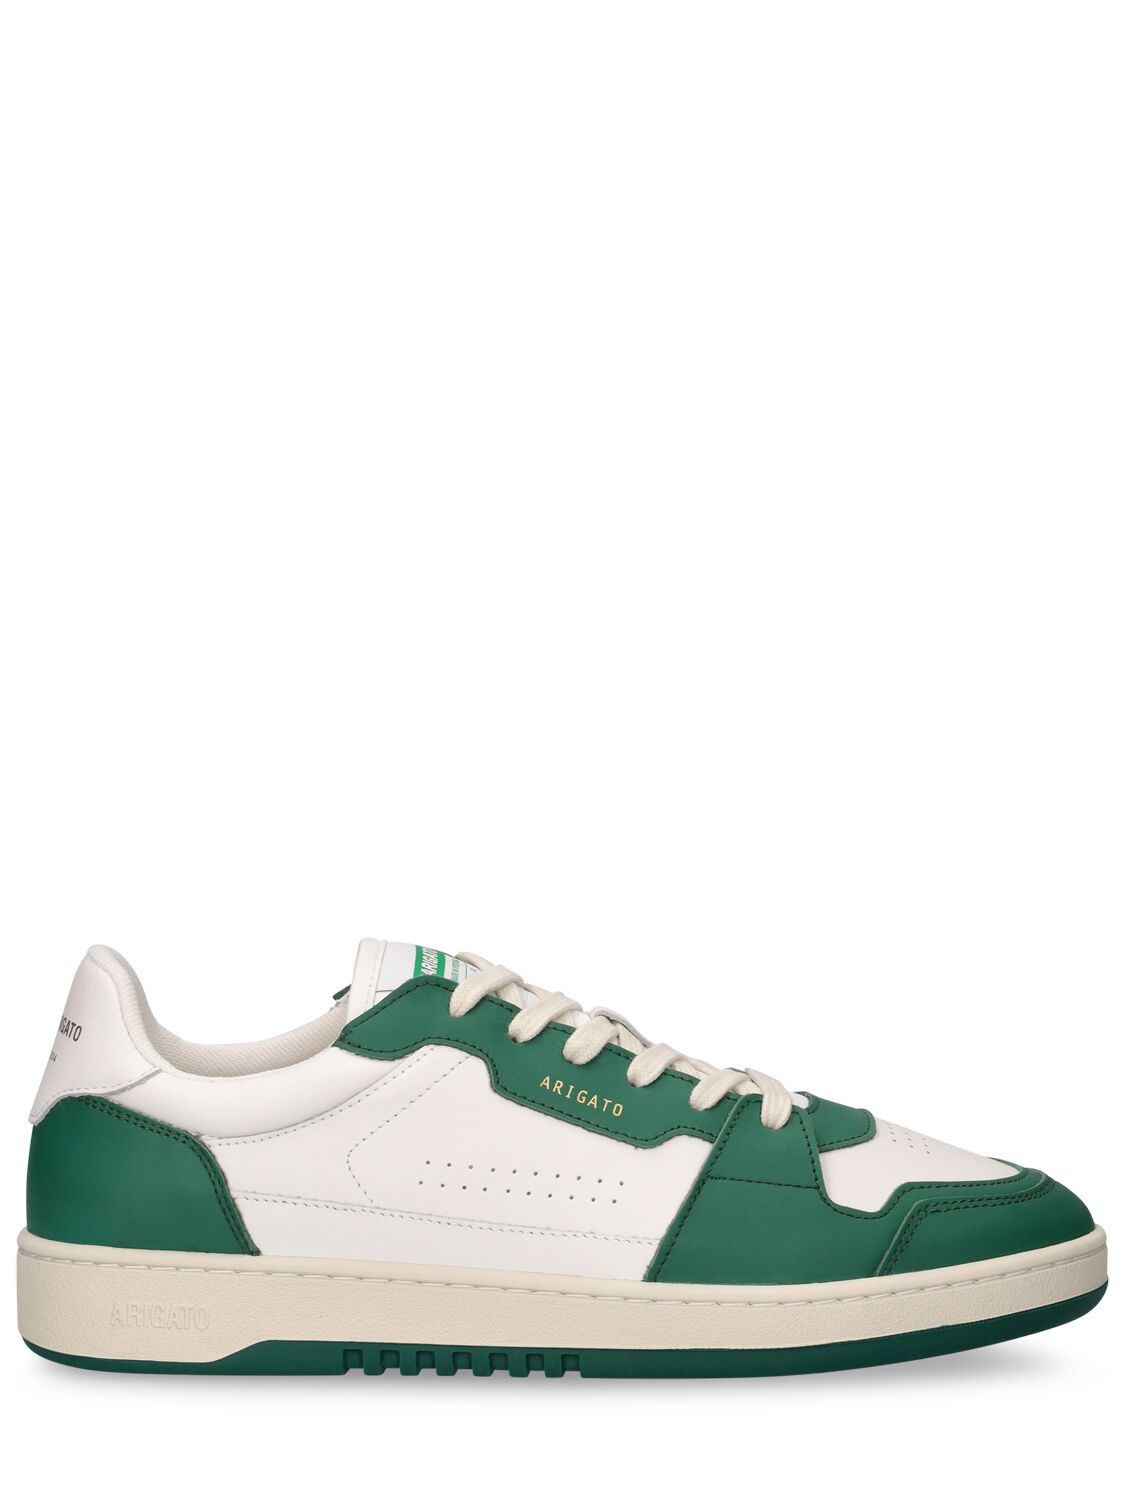 Dice Low Leather Sneakers